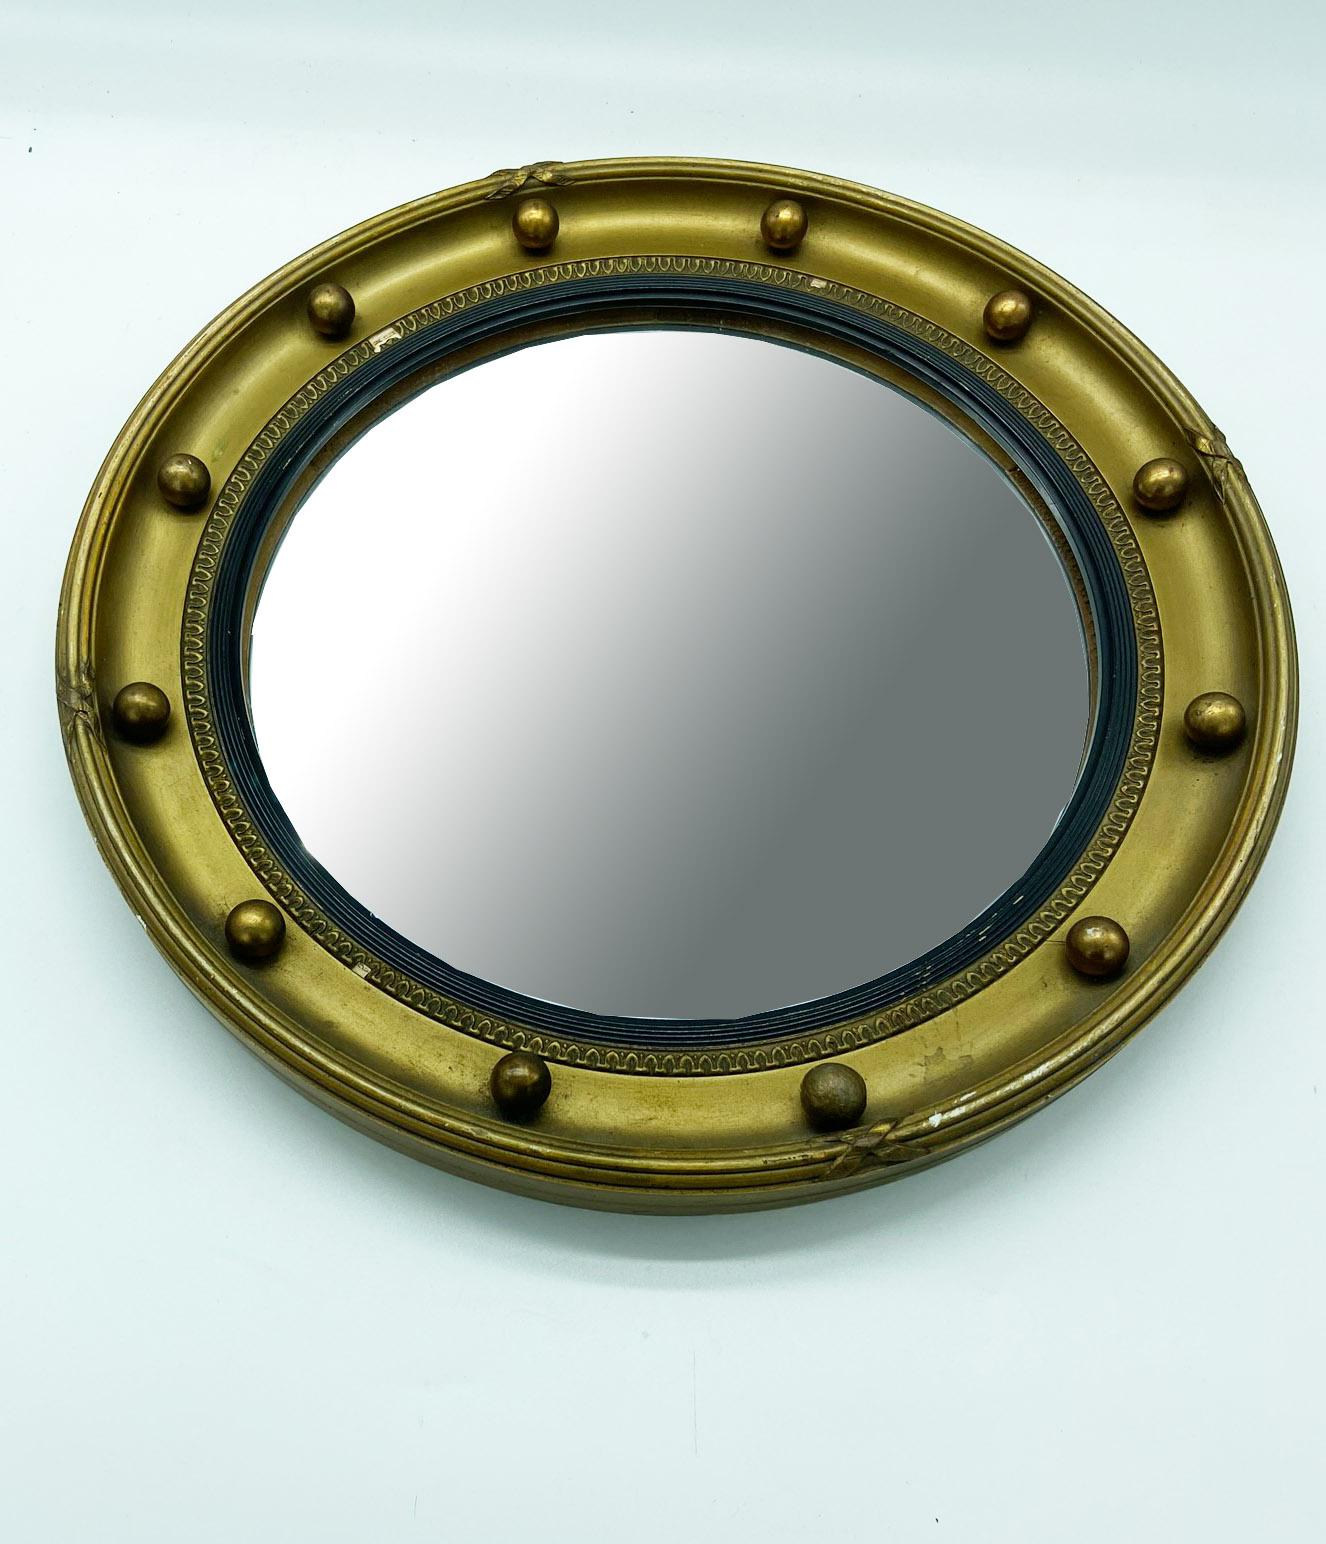 An English painted wood bullseye mirror from the late 19th century. The painted wood outer frame, whose gold color presents a perfect contrast to the dark hue of the inner frame, is delicately adorned with petite balls.